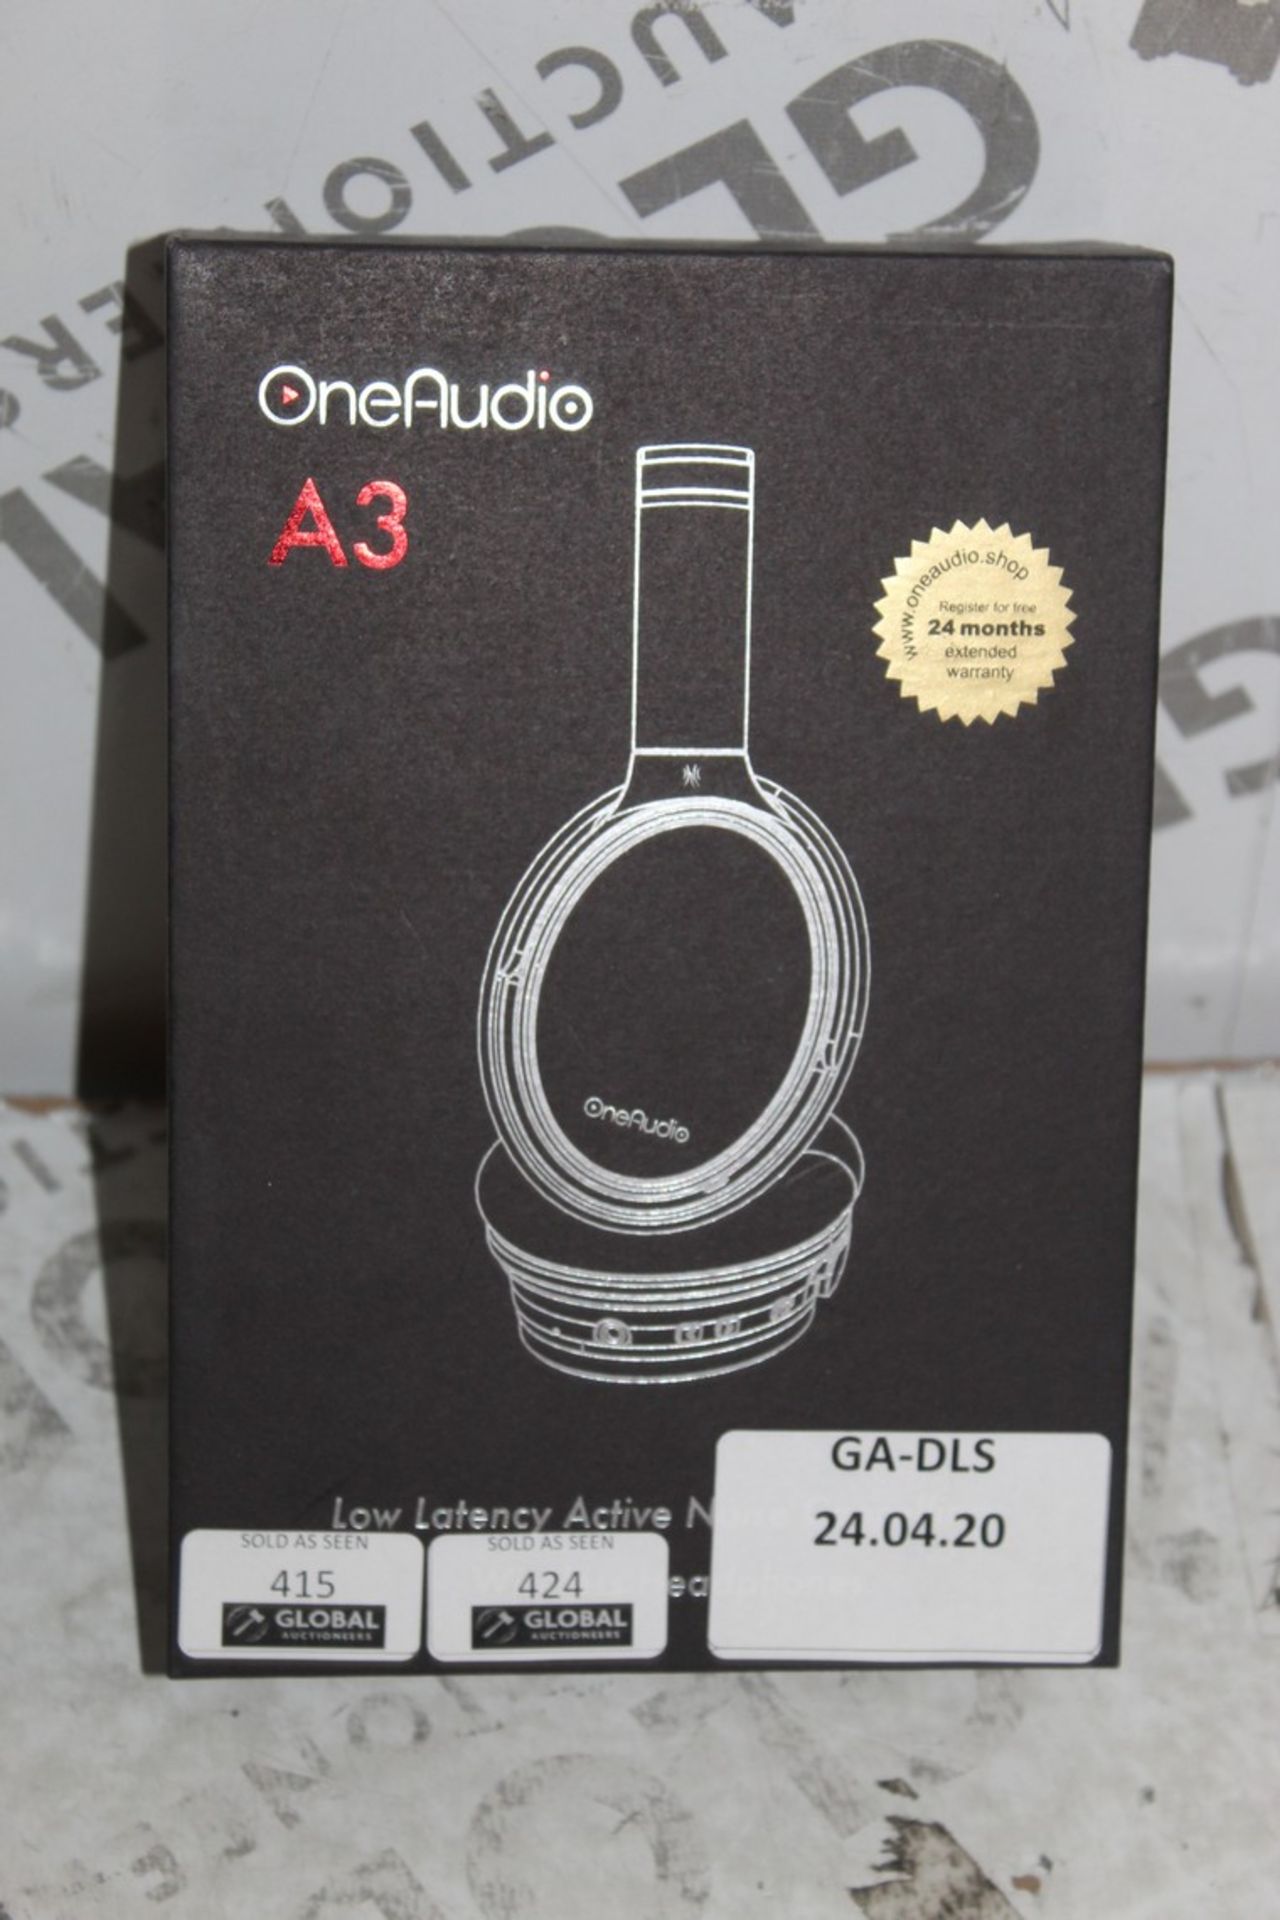 Boxed Pair of OneAudio A3 Active Wireless Headphon